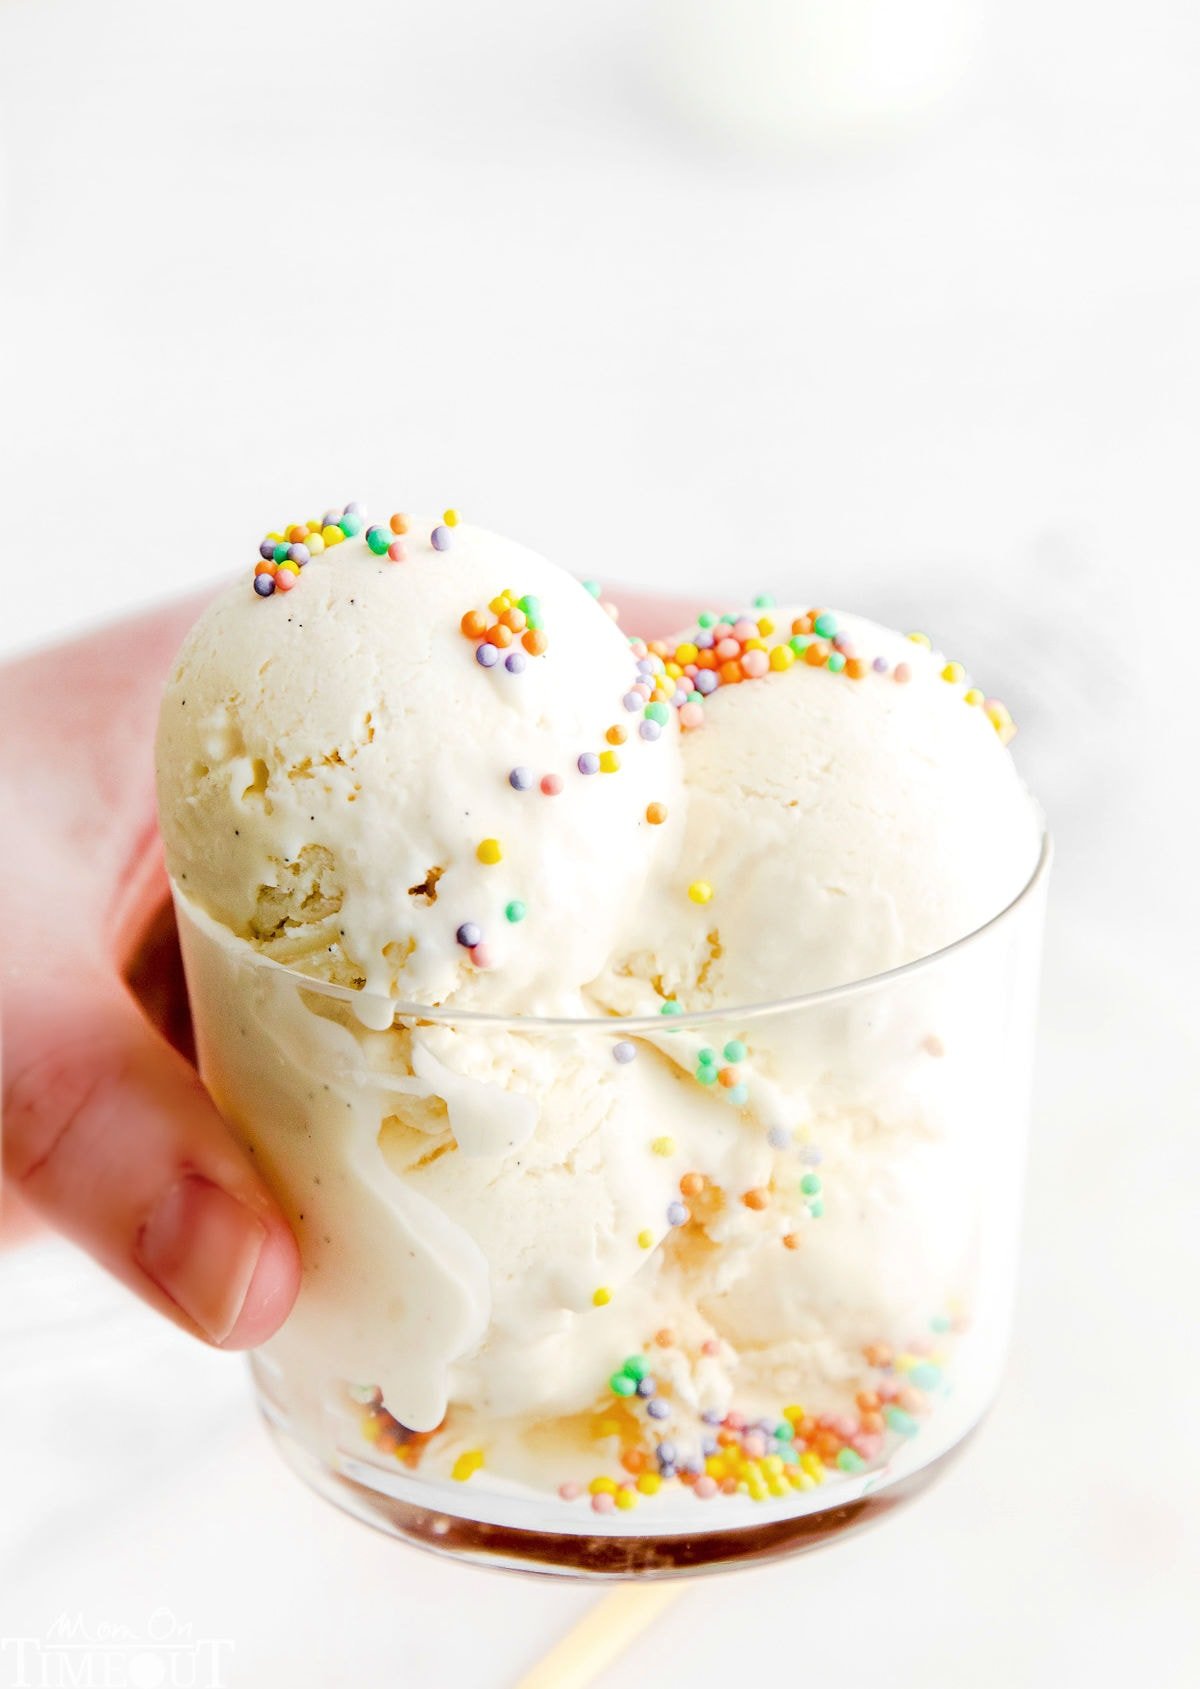 hand holding glass filled with ice cream and topped with colorful sprinkles.